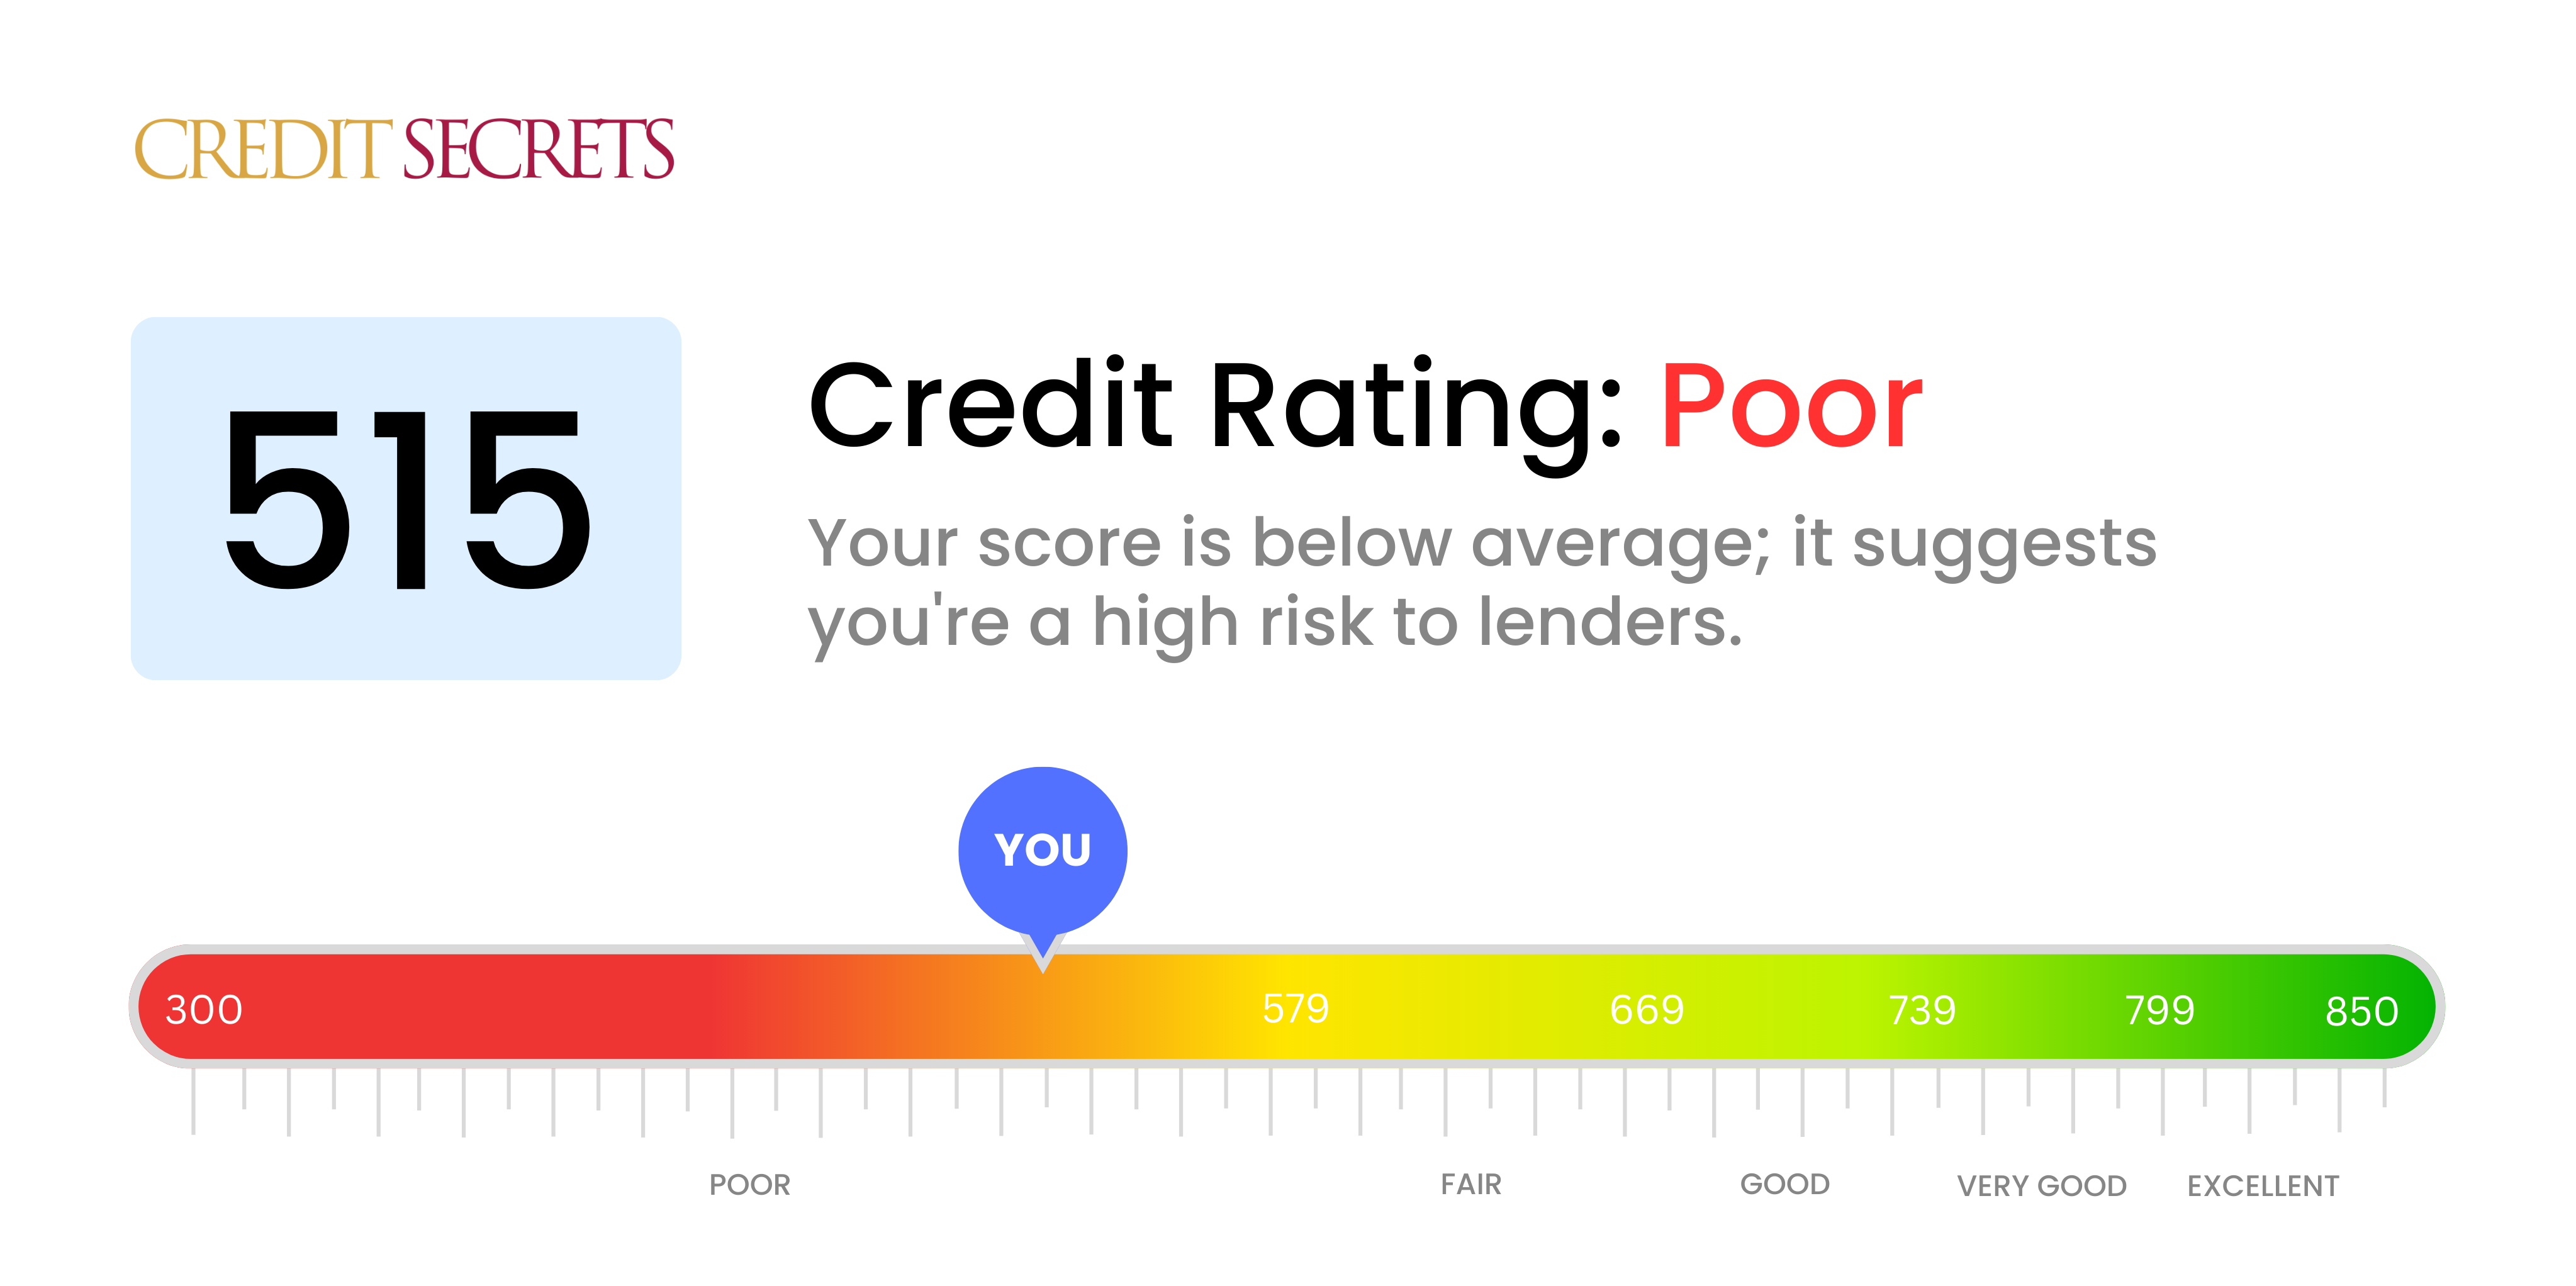 Is 515 a good credit score?